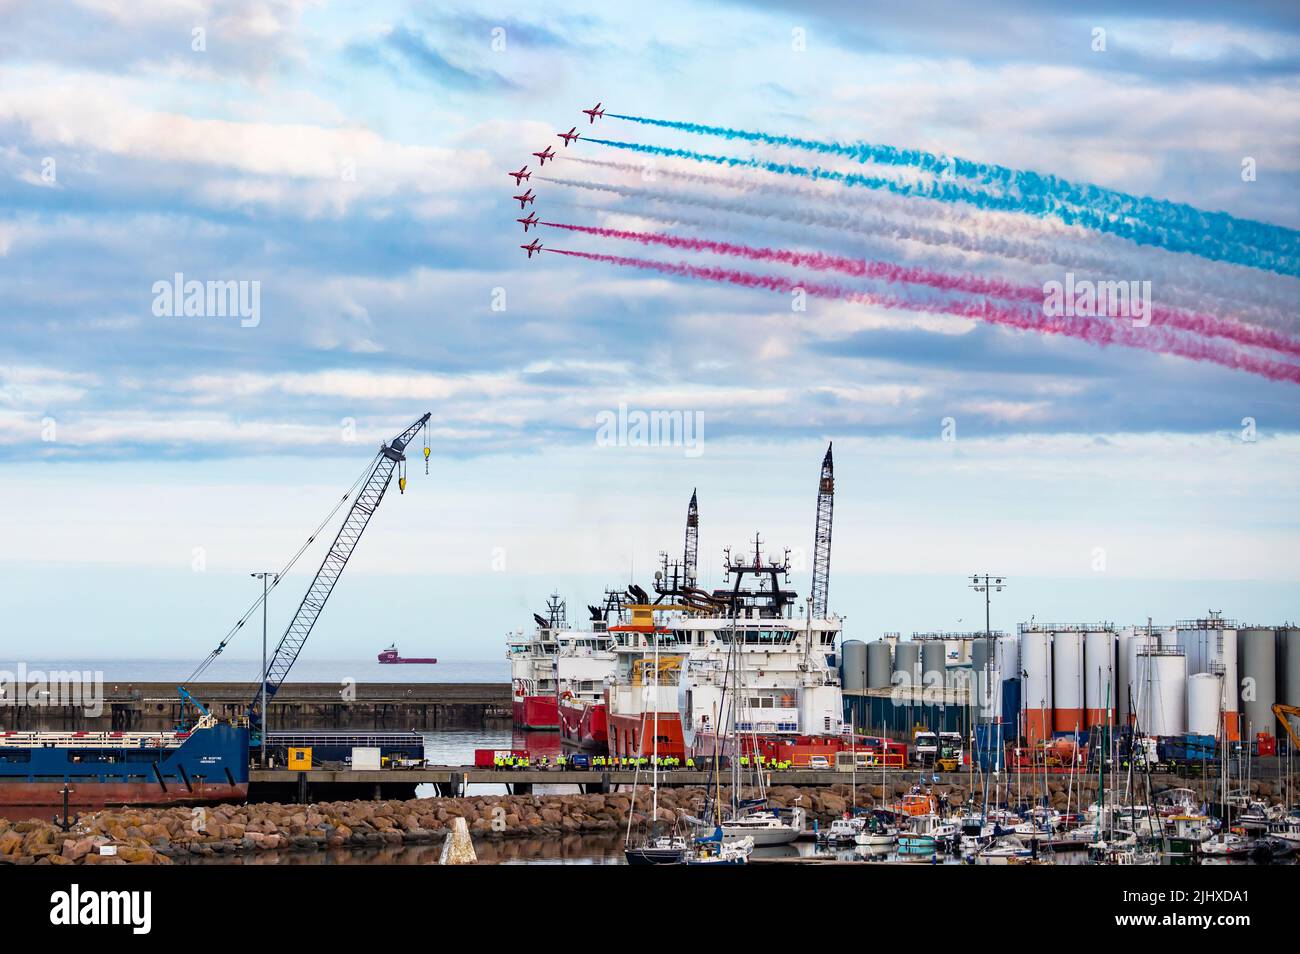 The RAF Red Arrows perform their display over Peterhead harbour in Aberdeenshire, Scotpand, as part of Scottish Week Stock Photo